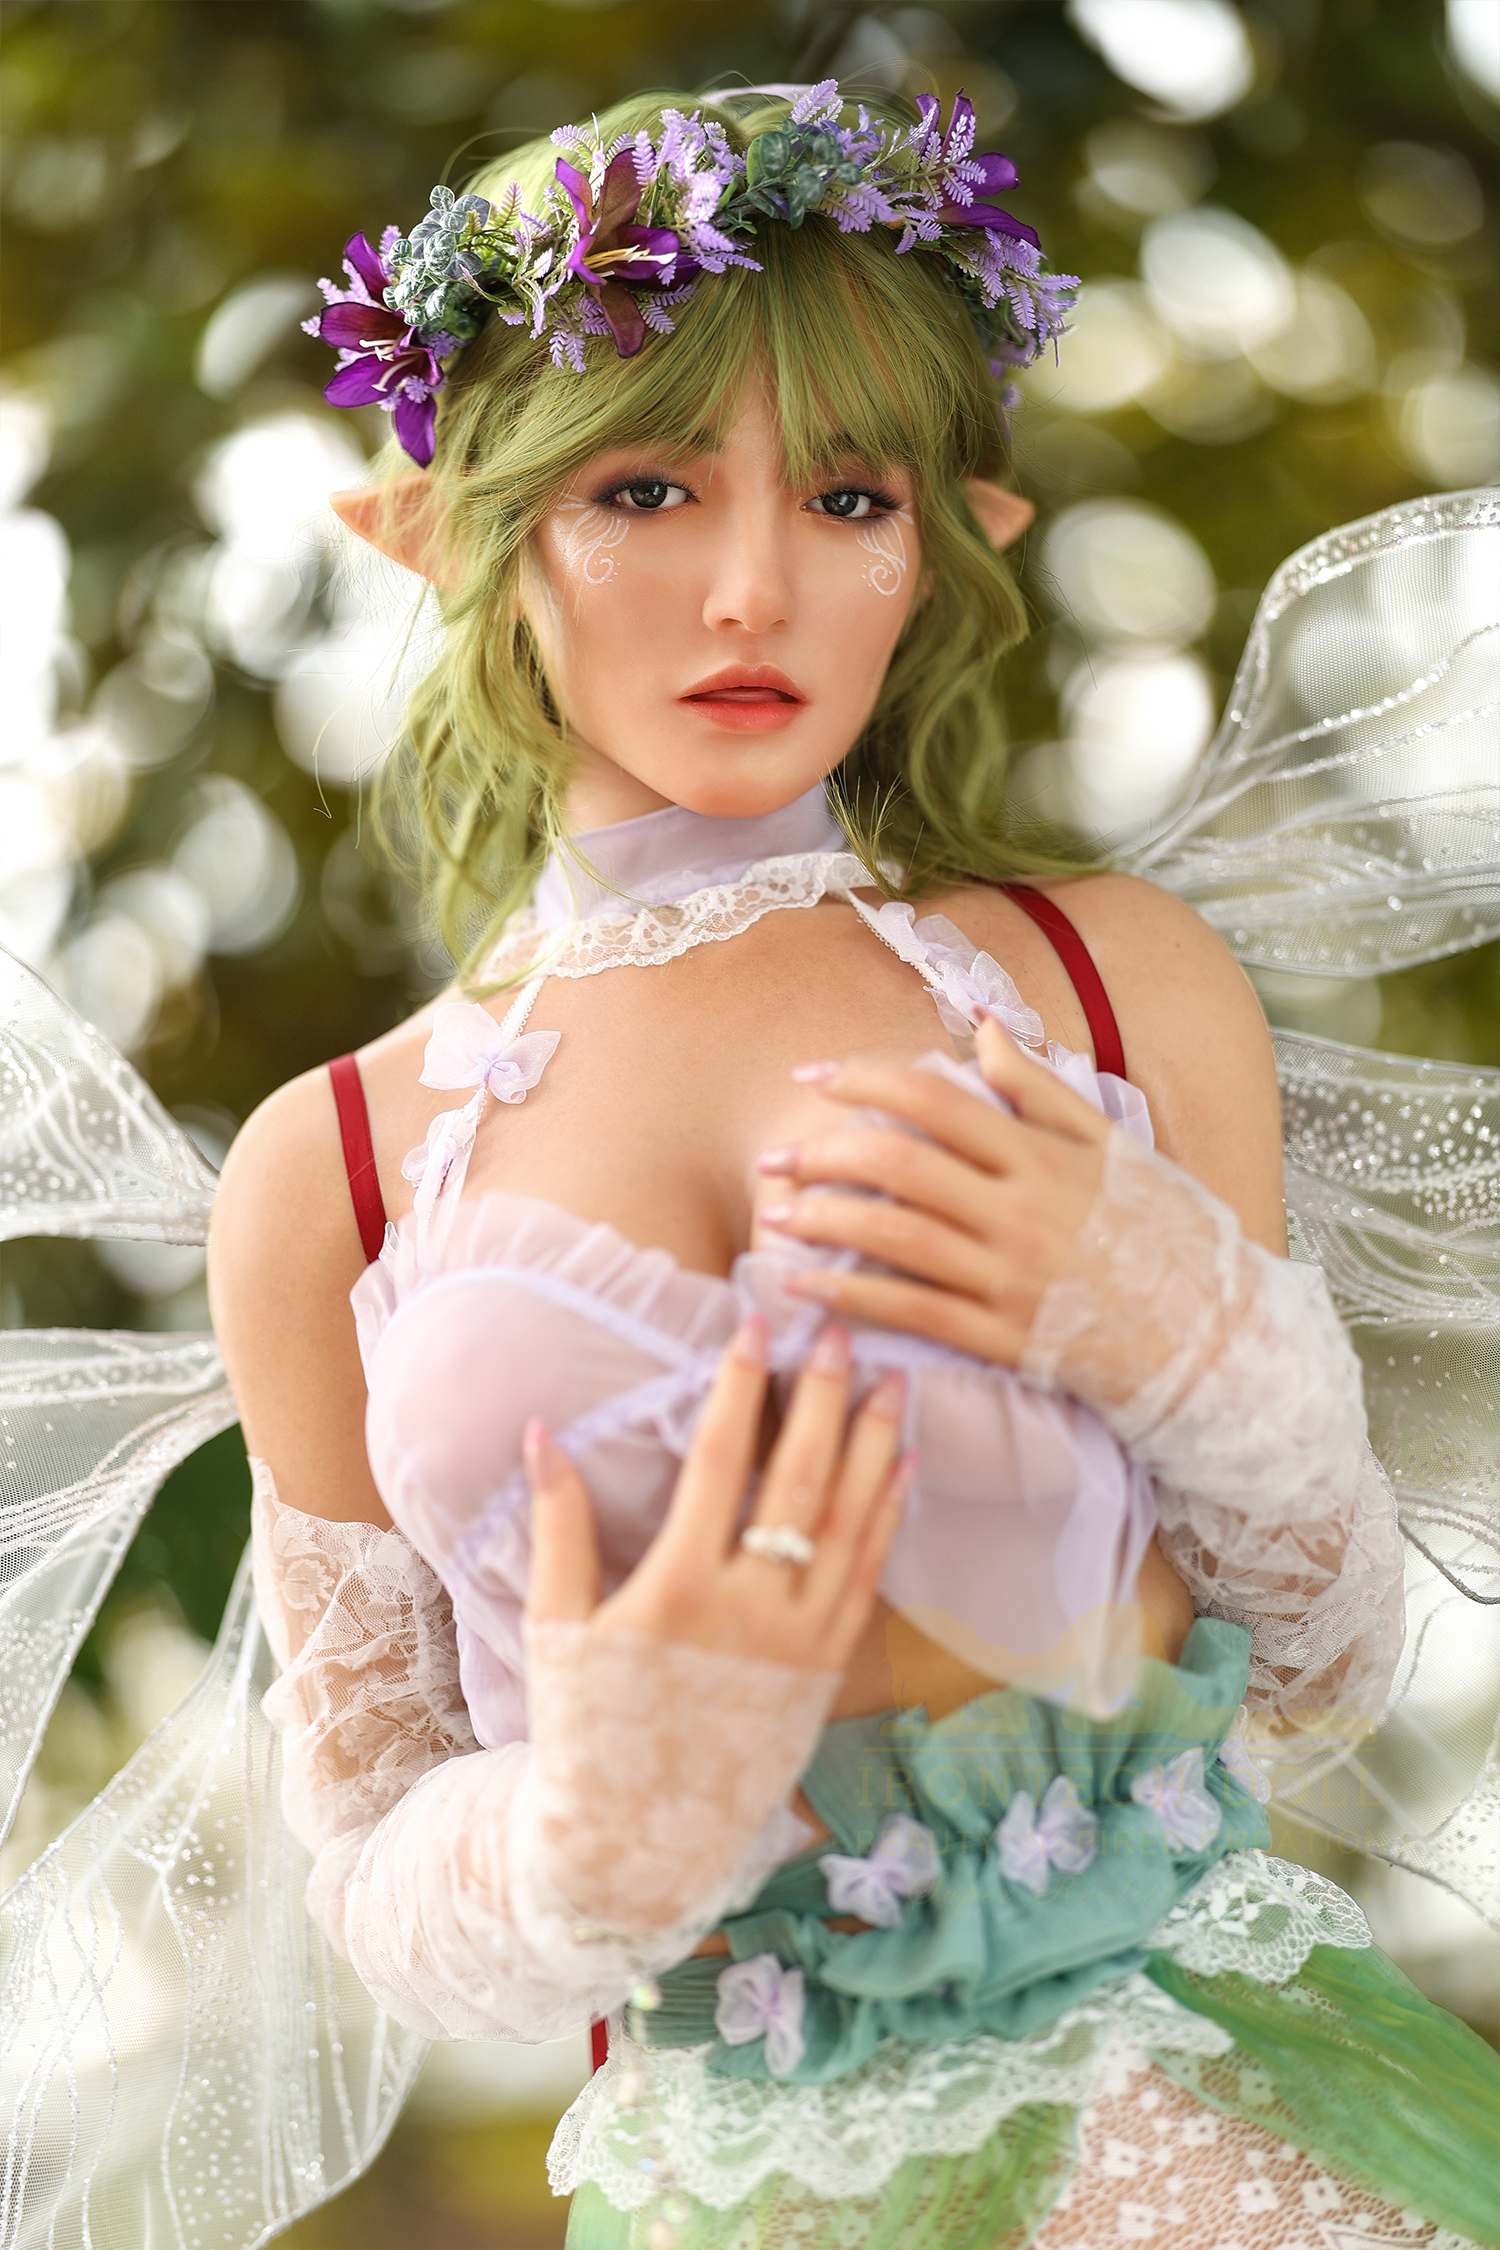 5ft47/167cm D Cup Silicone Fairy Sex Doll S48 – Echo Elf